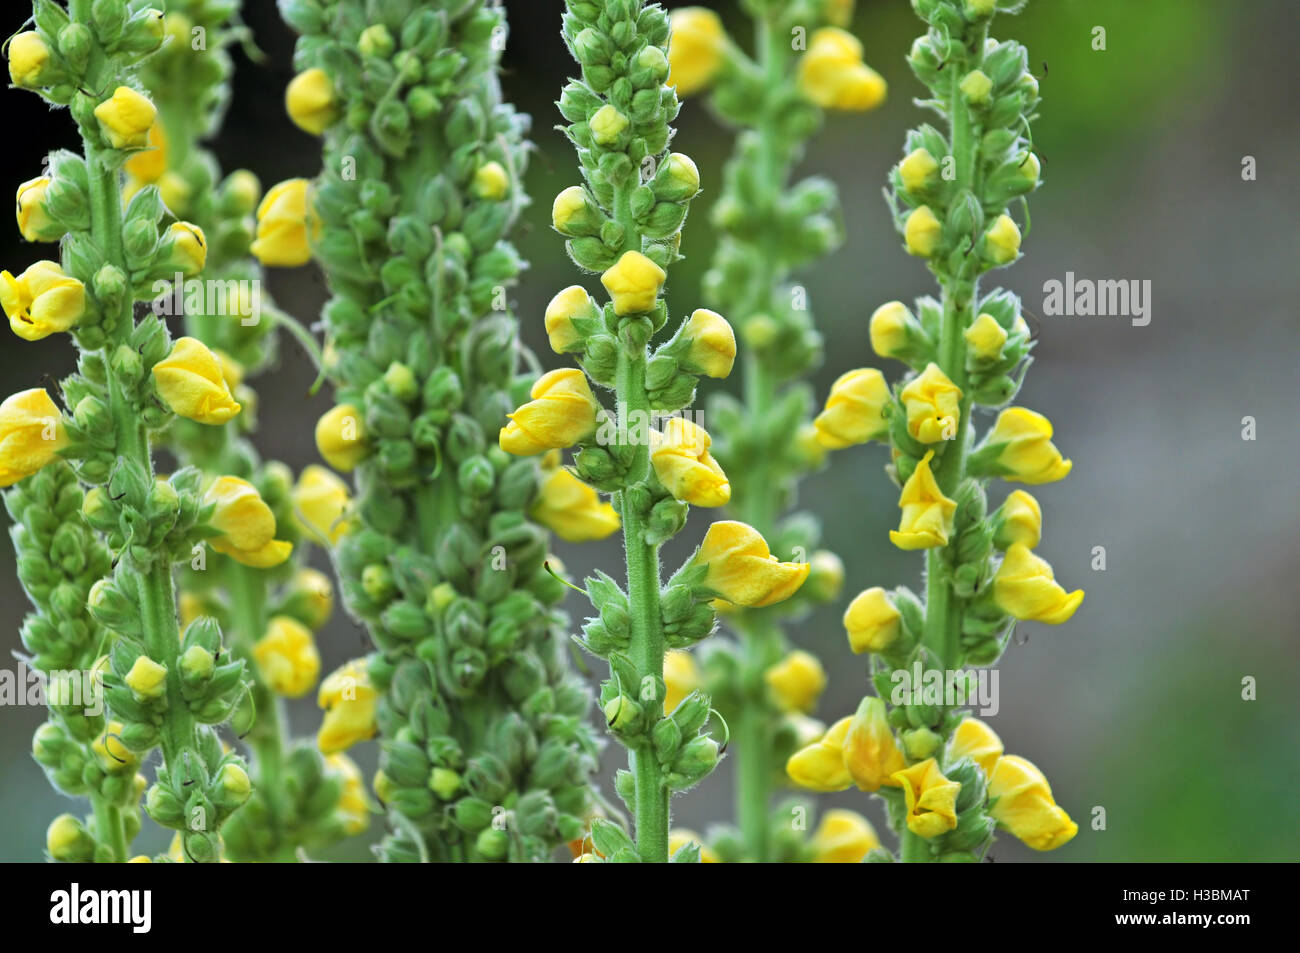 Close up of mullein flower with yellow blossoms Stock Photo